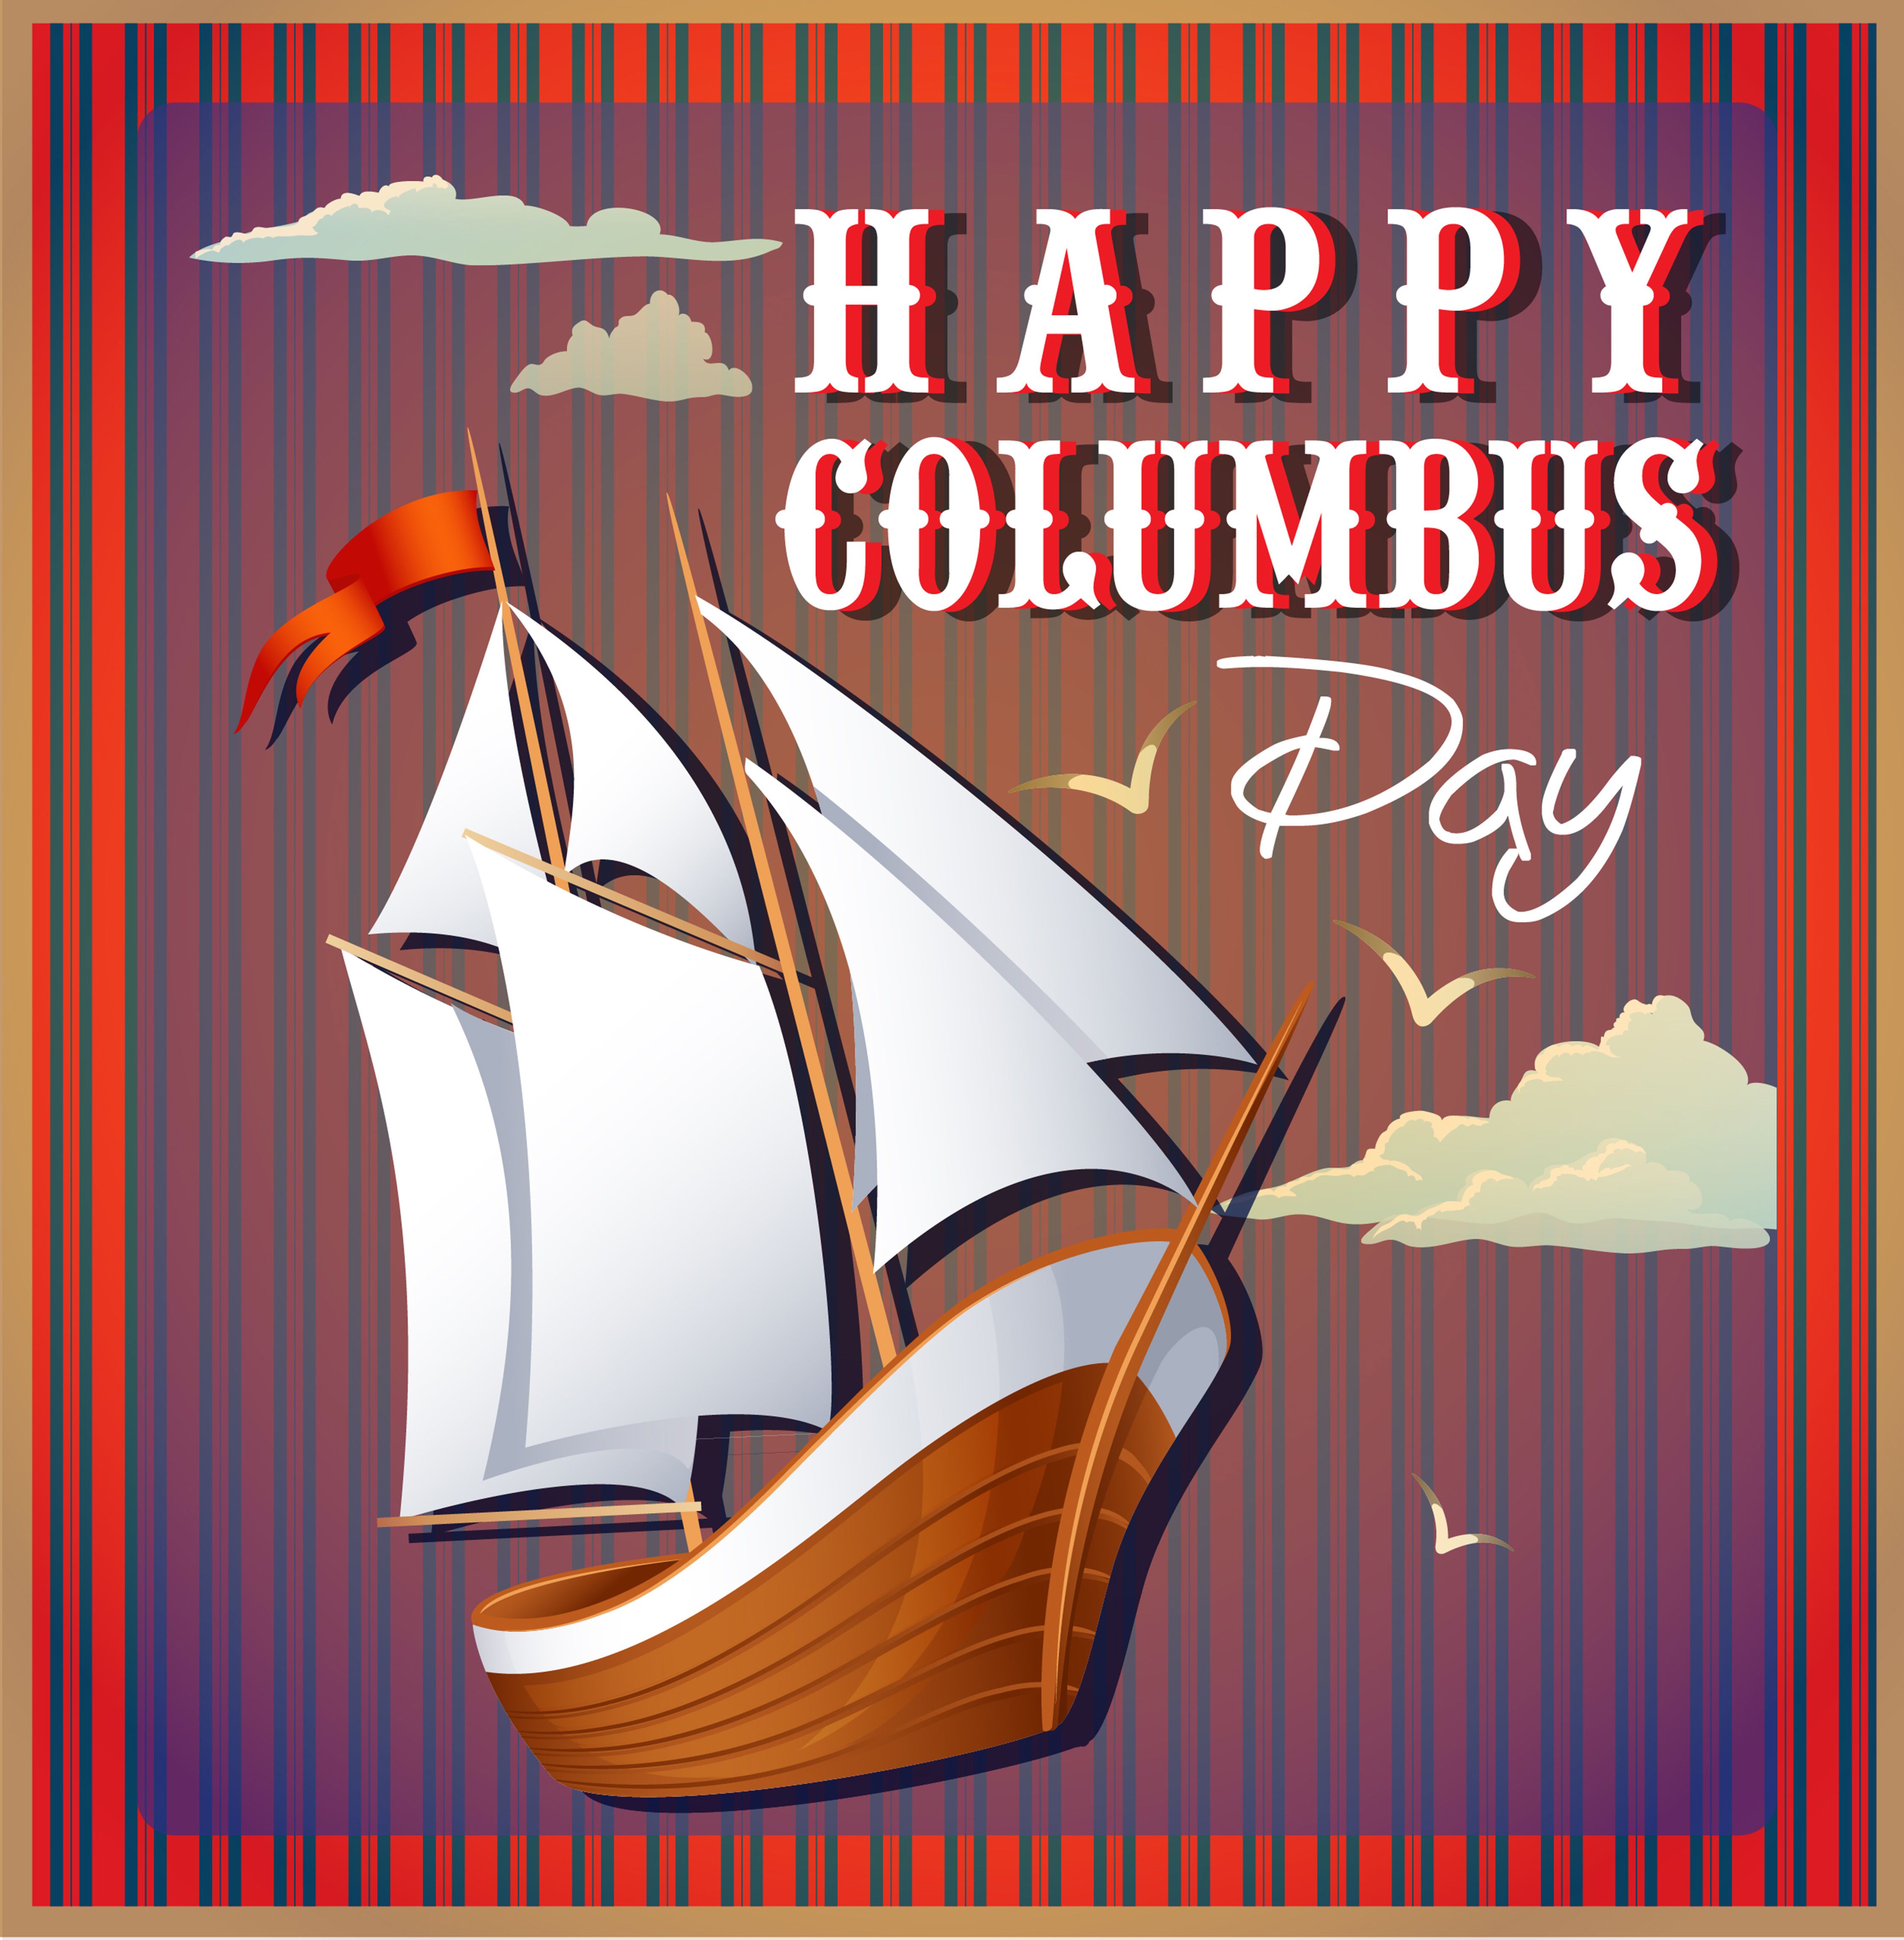 Images: Columbus Day 2016